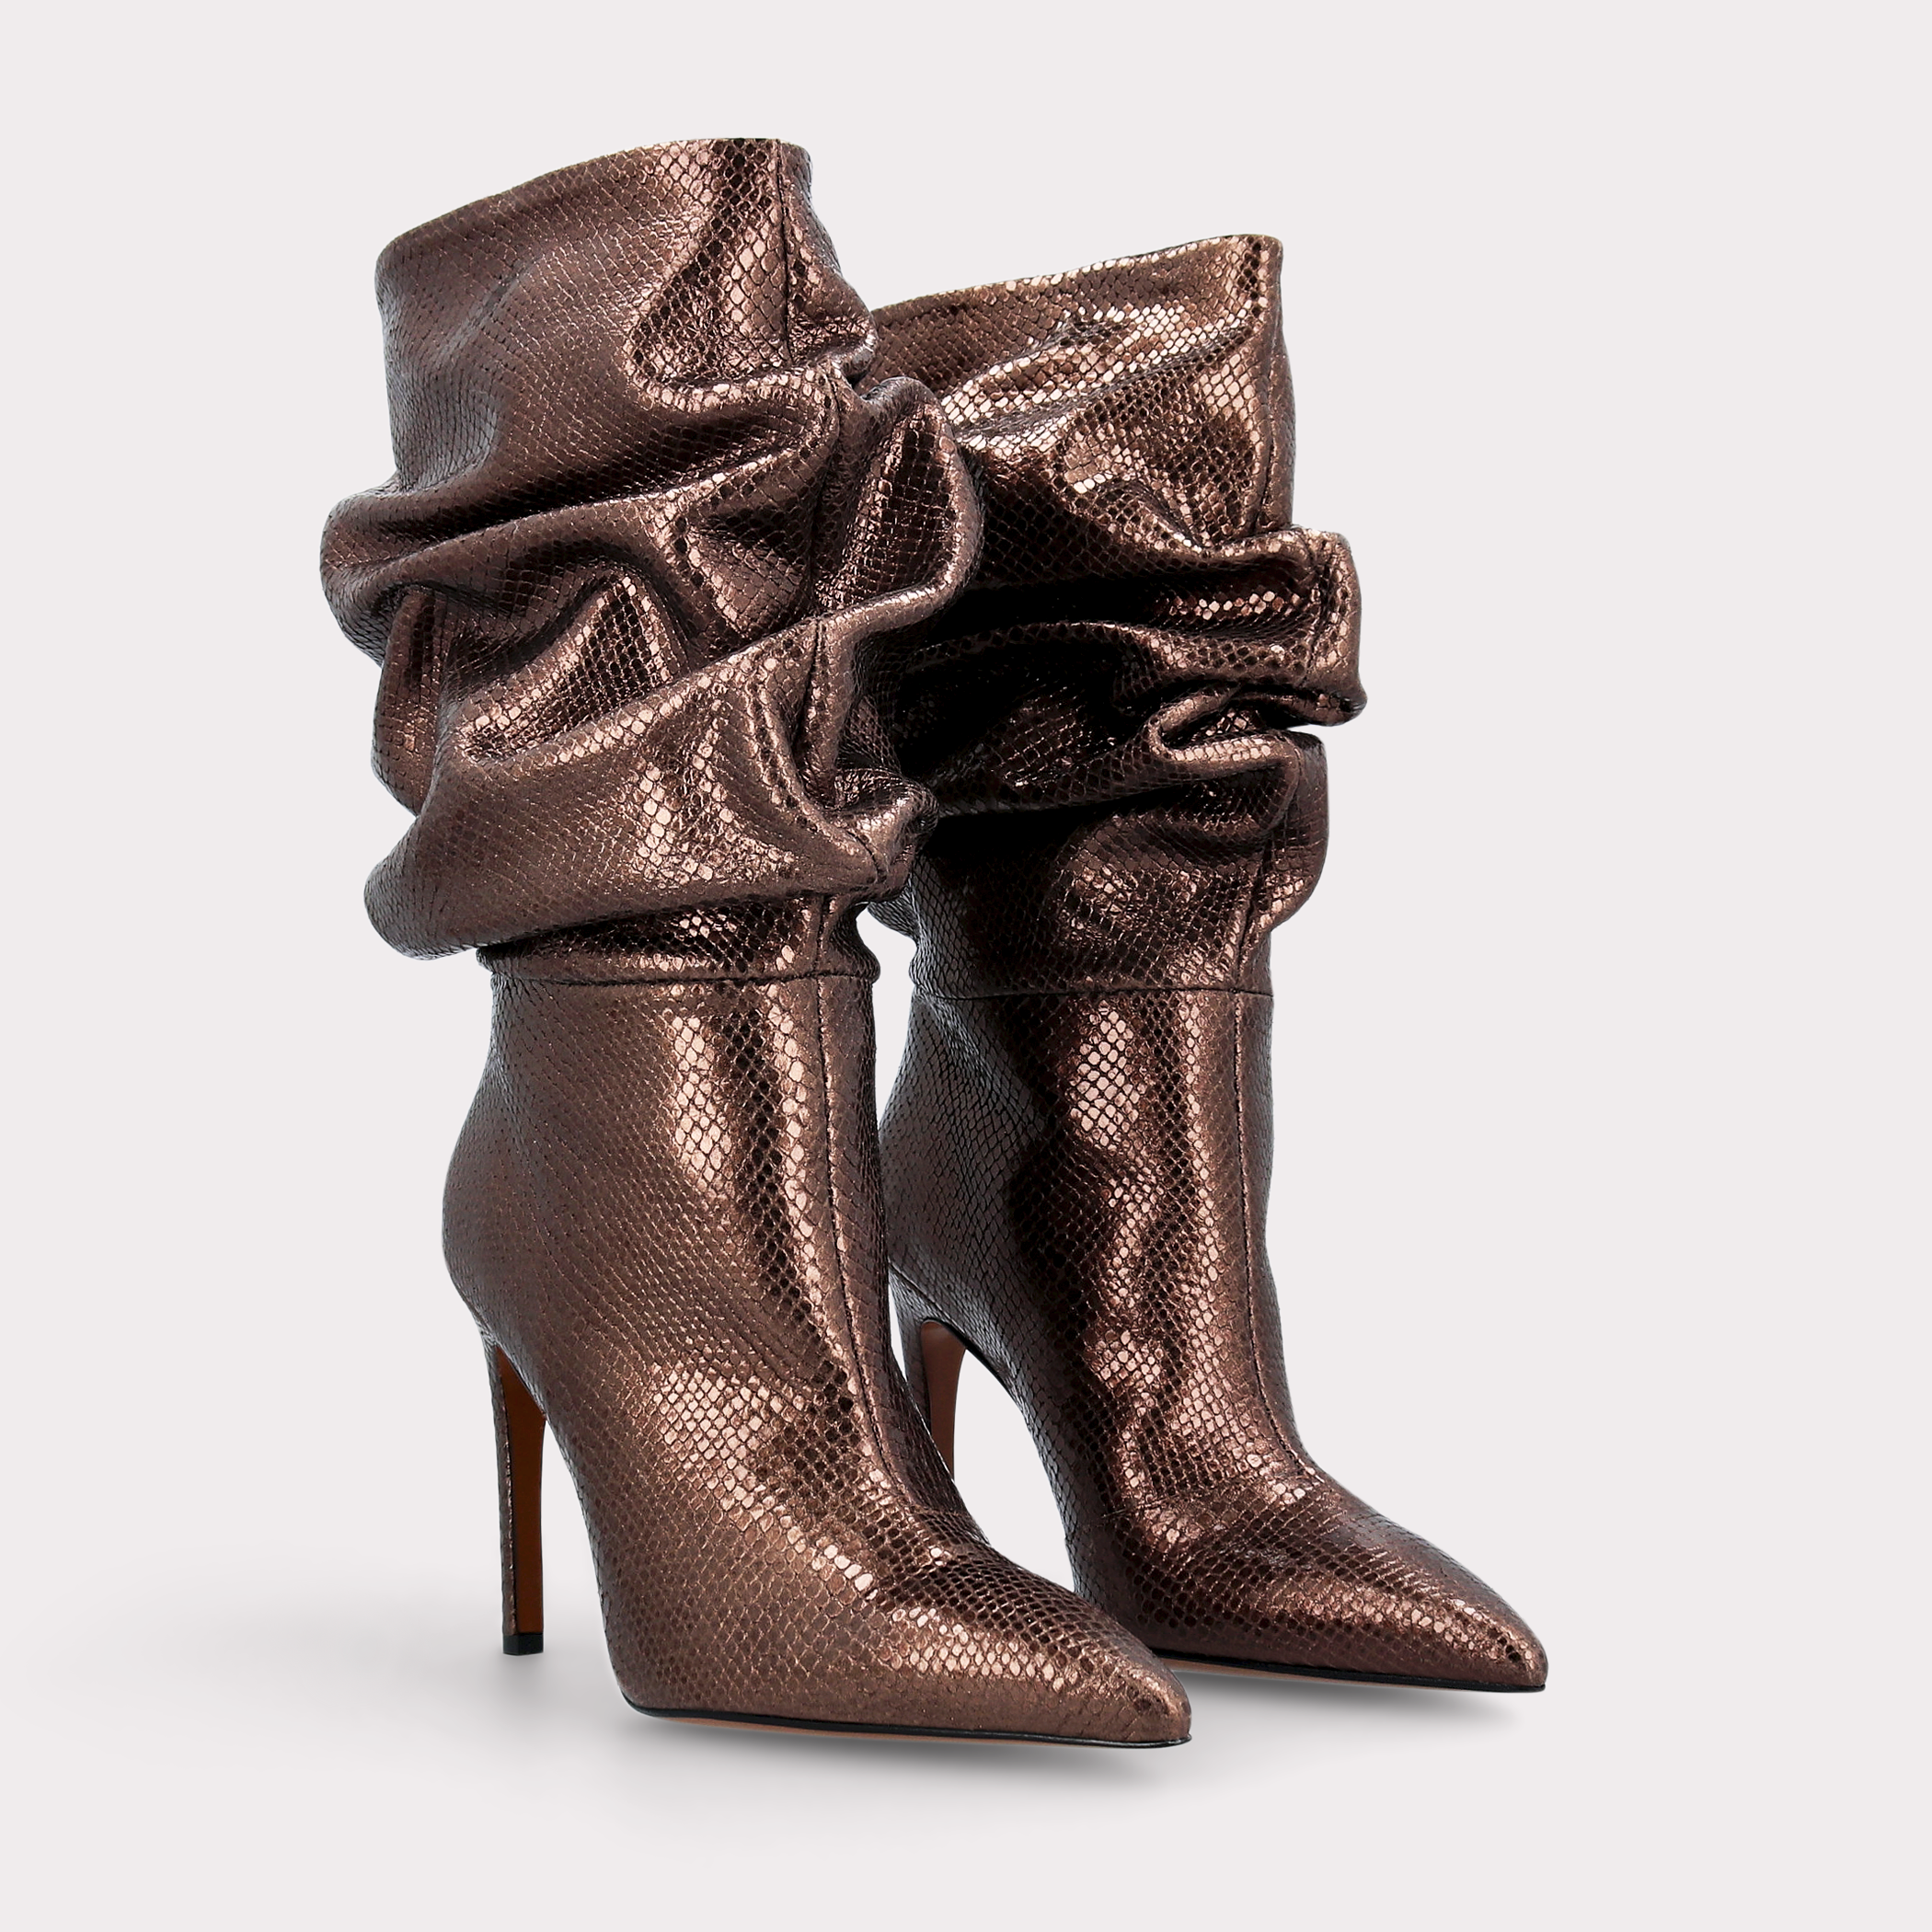 GRACE 03 BRONZE LIZZARD EMBOSSED LEATHER BOOTS